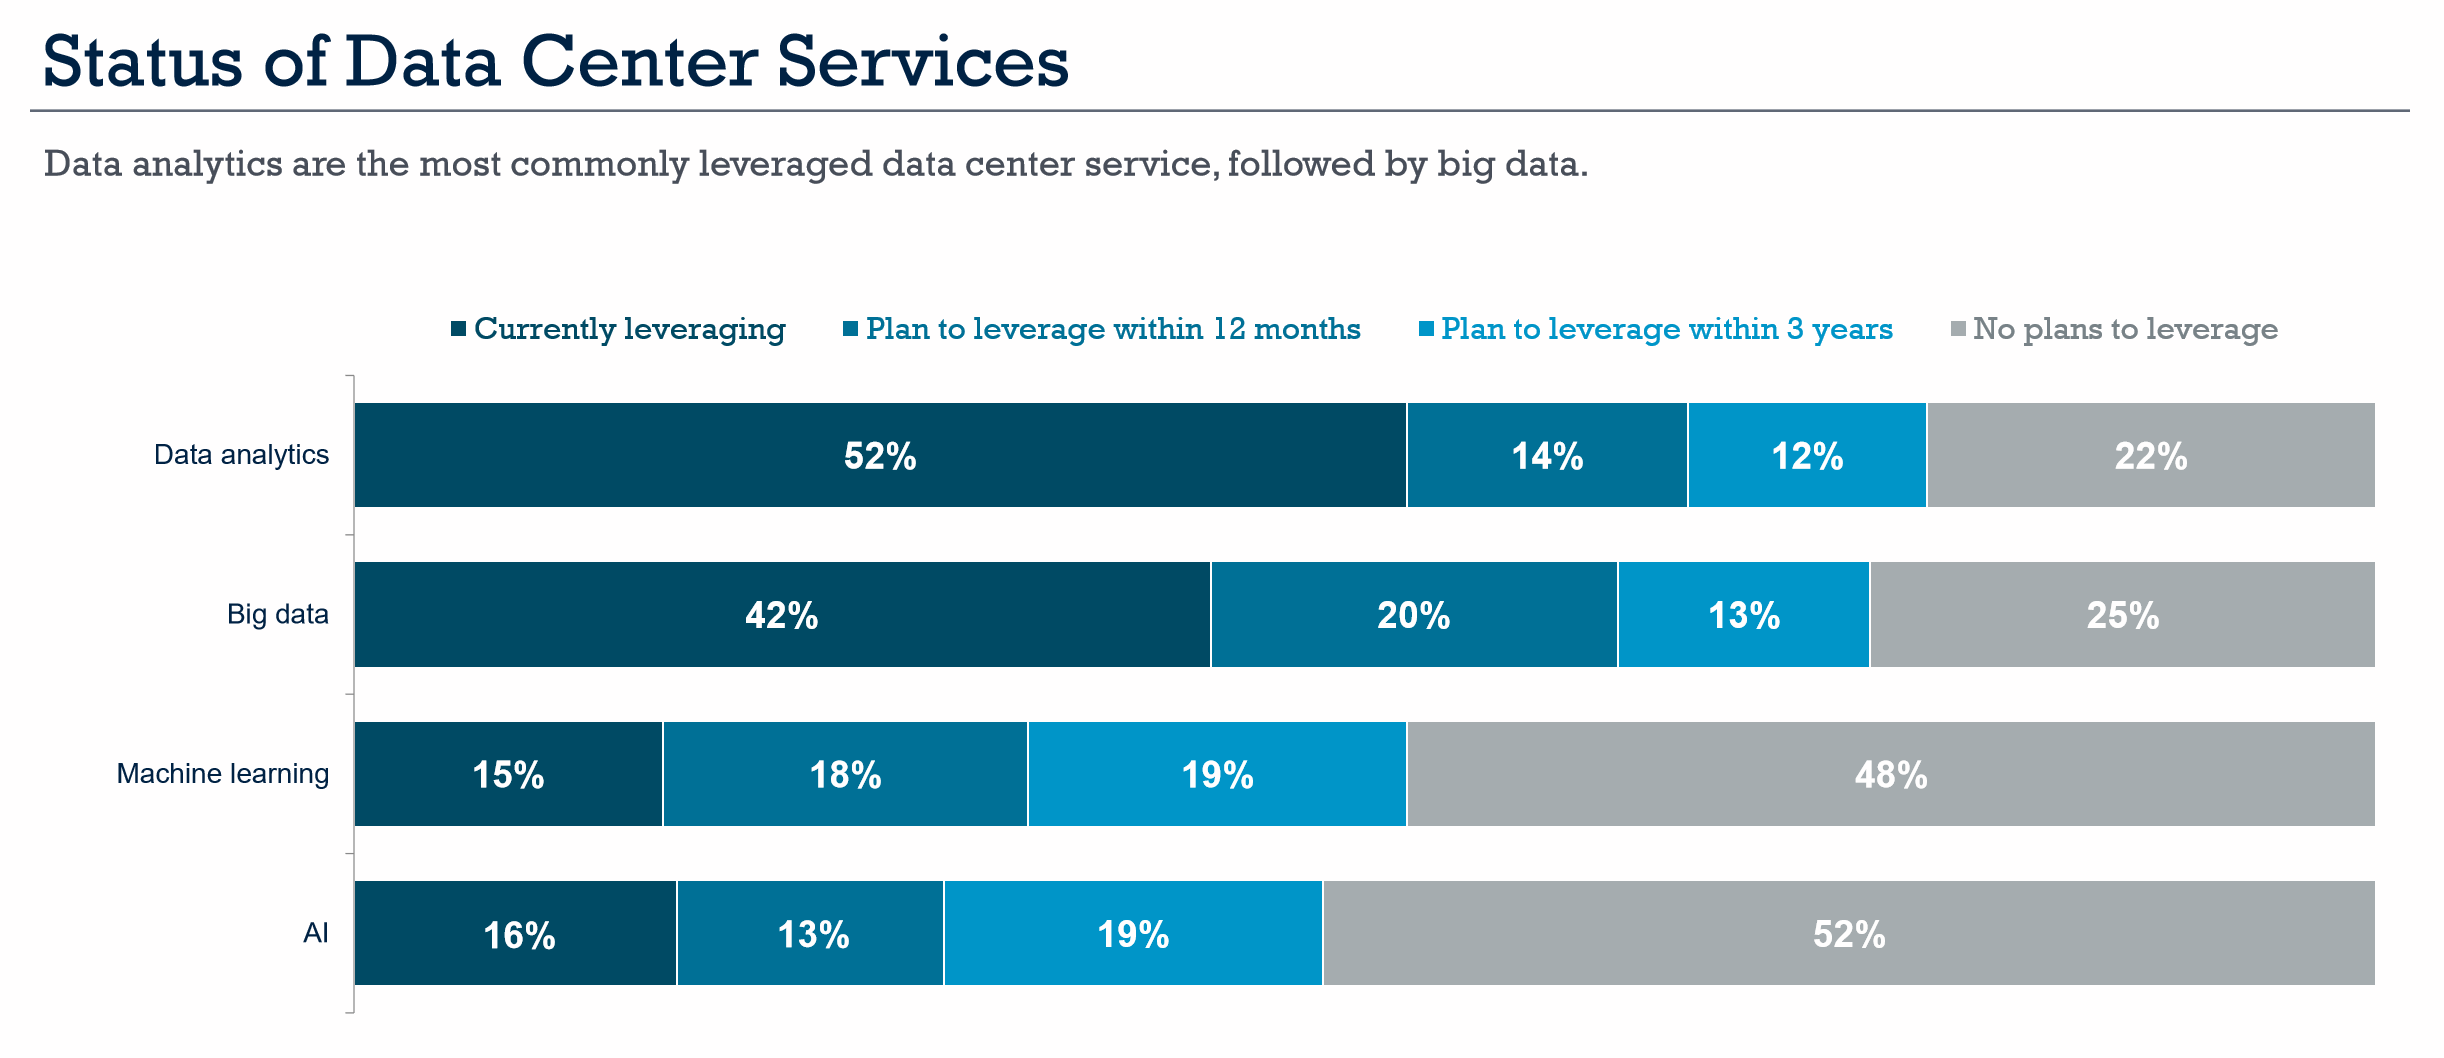 Status of the Data Center Services